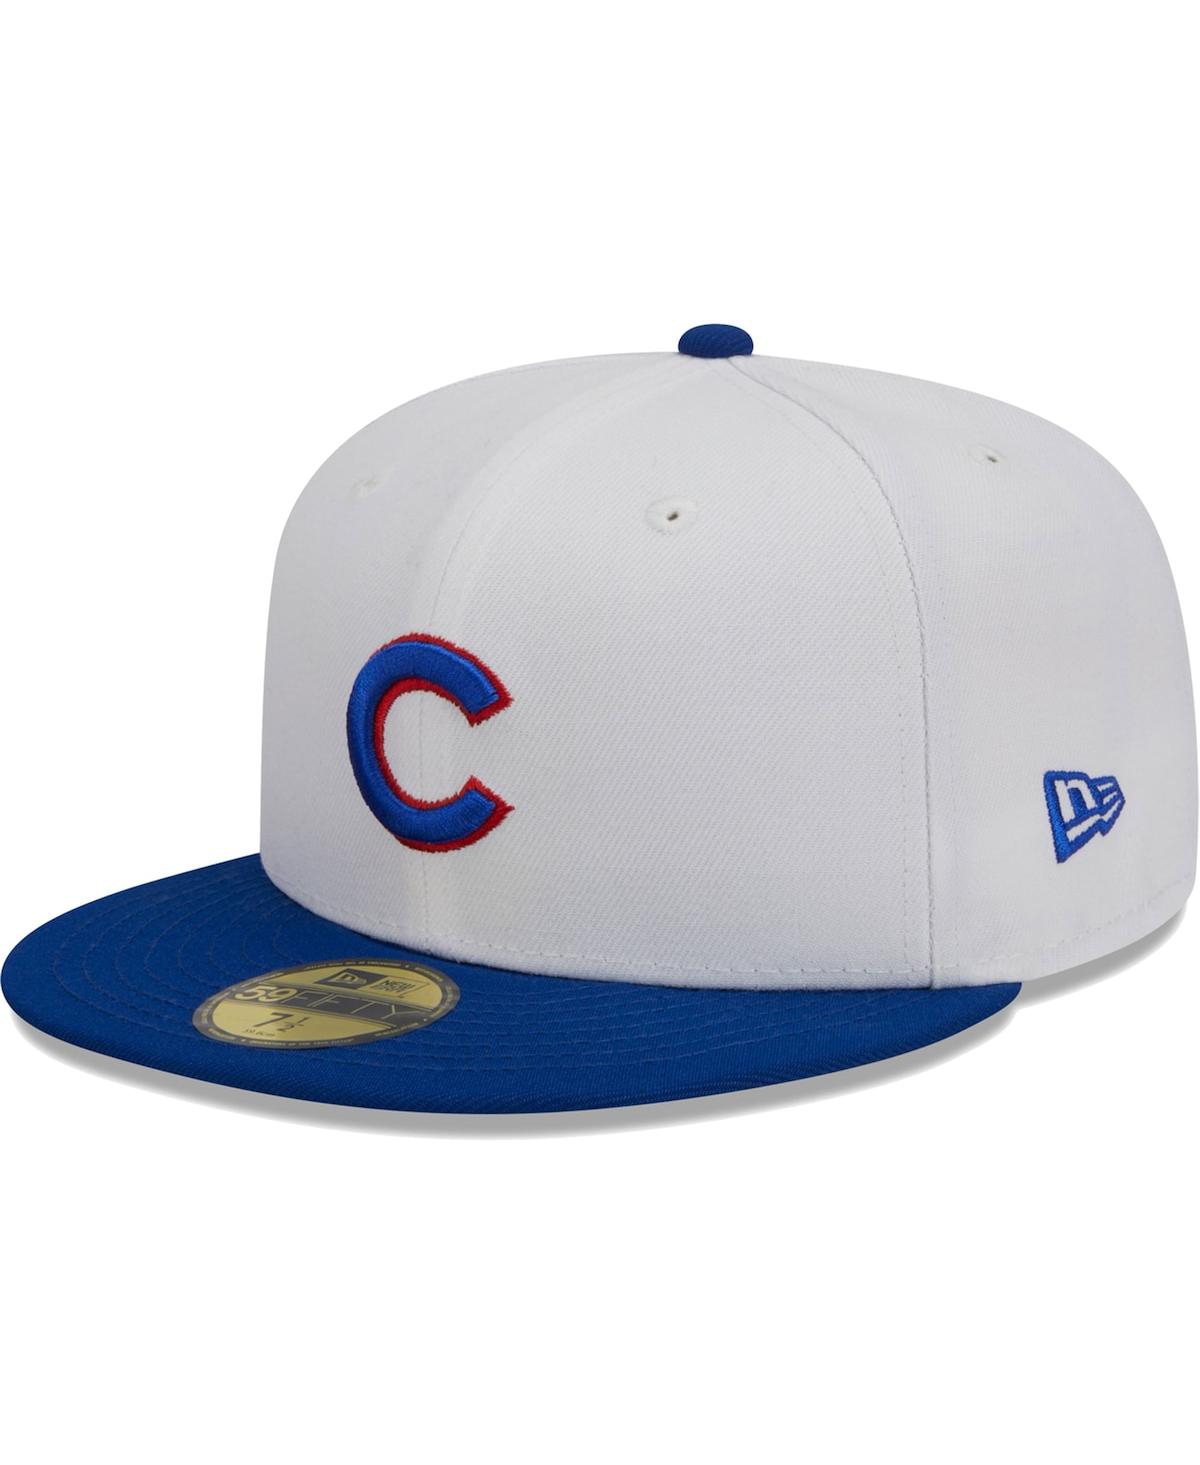 Cincinnati Reds New Era Alternate 2 Authentic Collection On-Field Low Profile 59FIFTY Fitted Hat - Olive